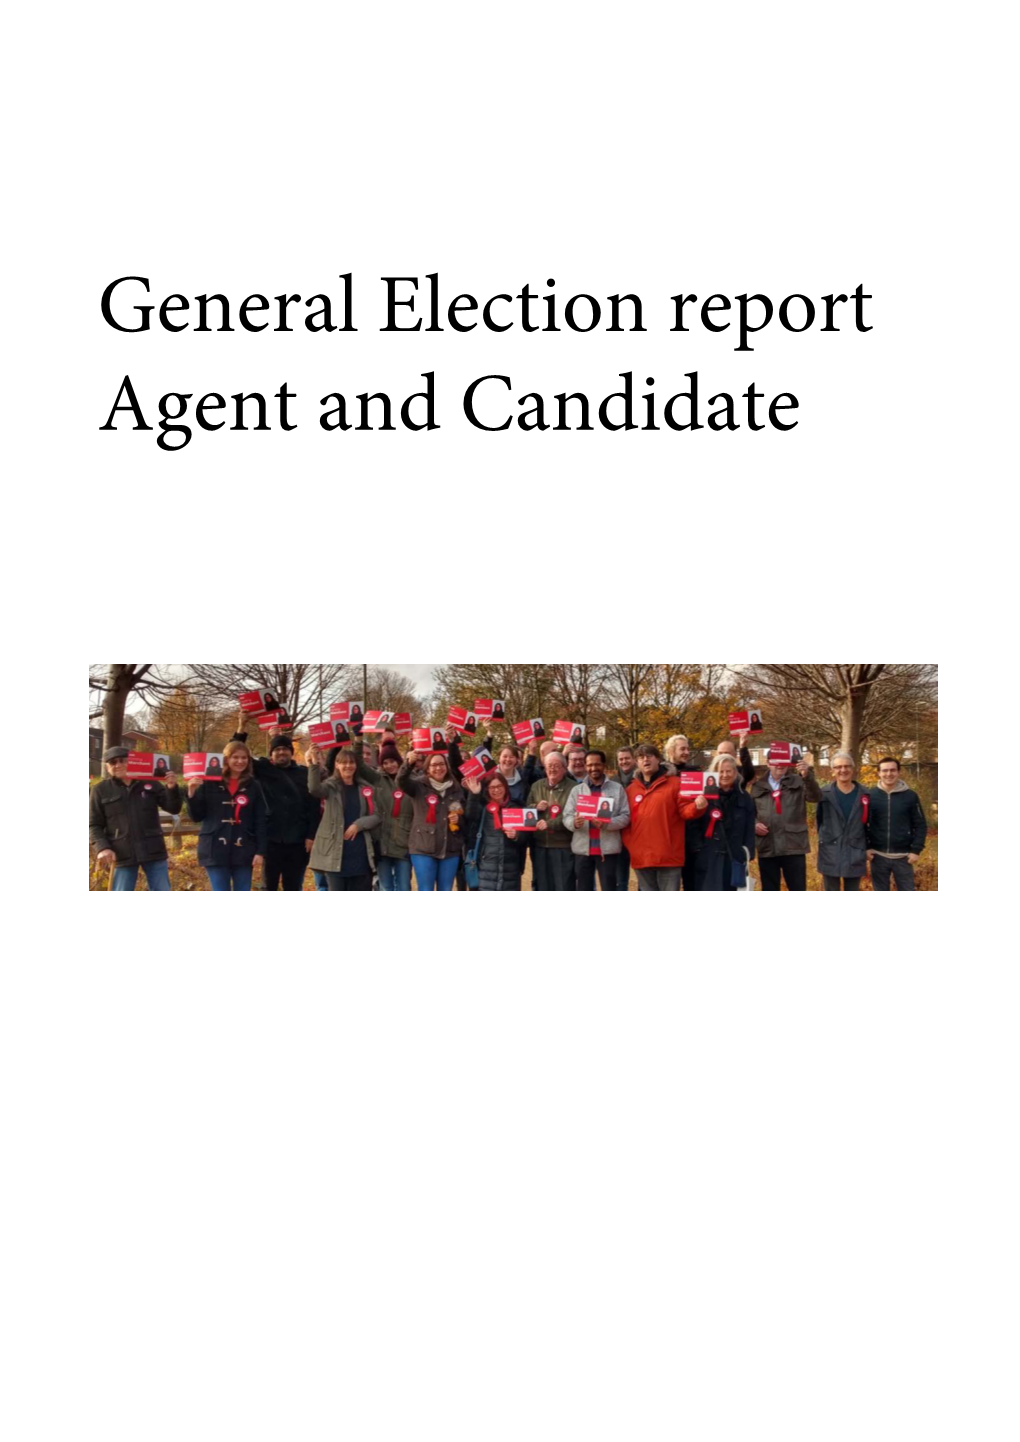 General Election Report Agent and Candidate AGENTS REPORT